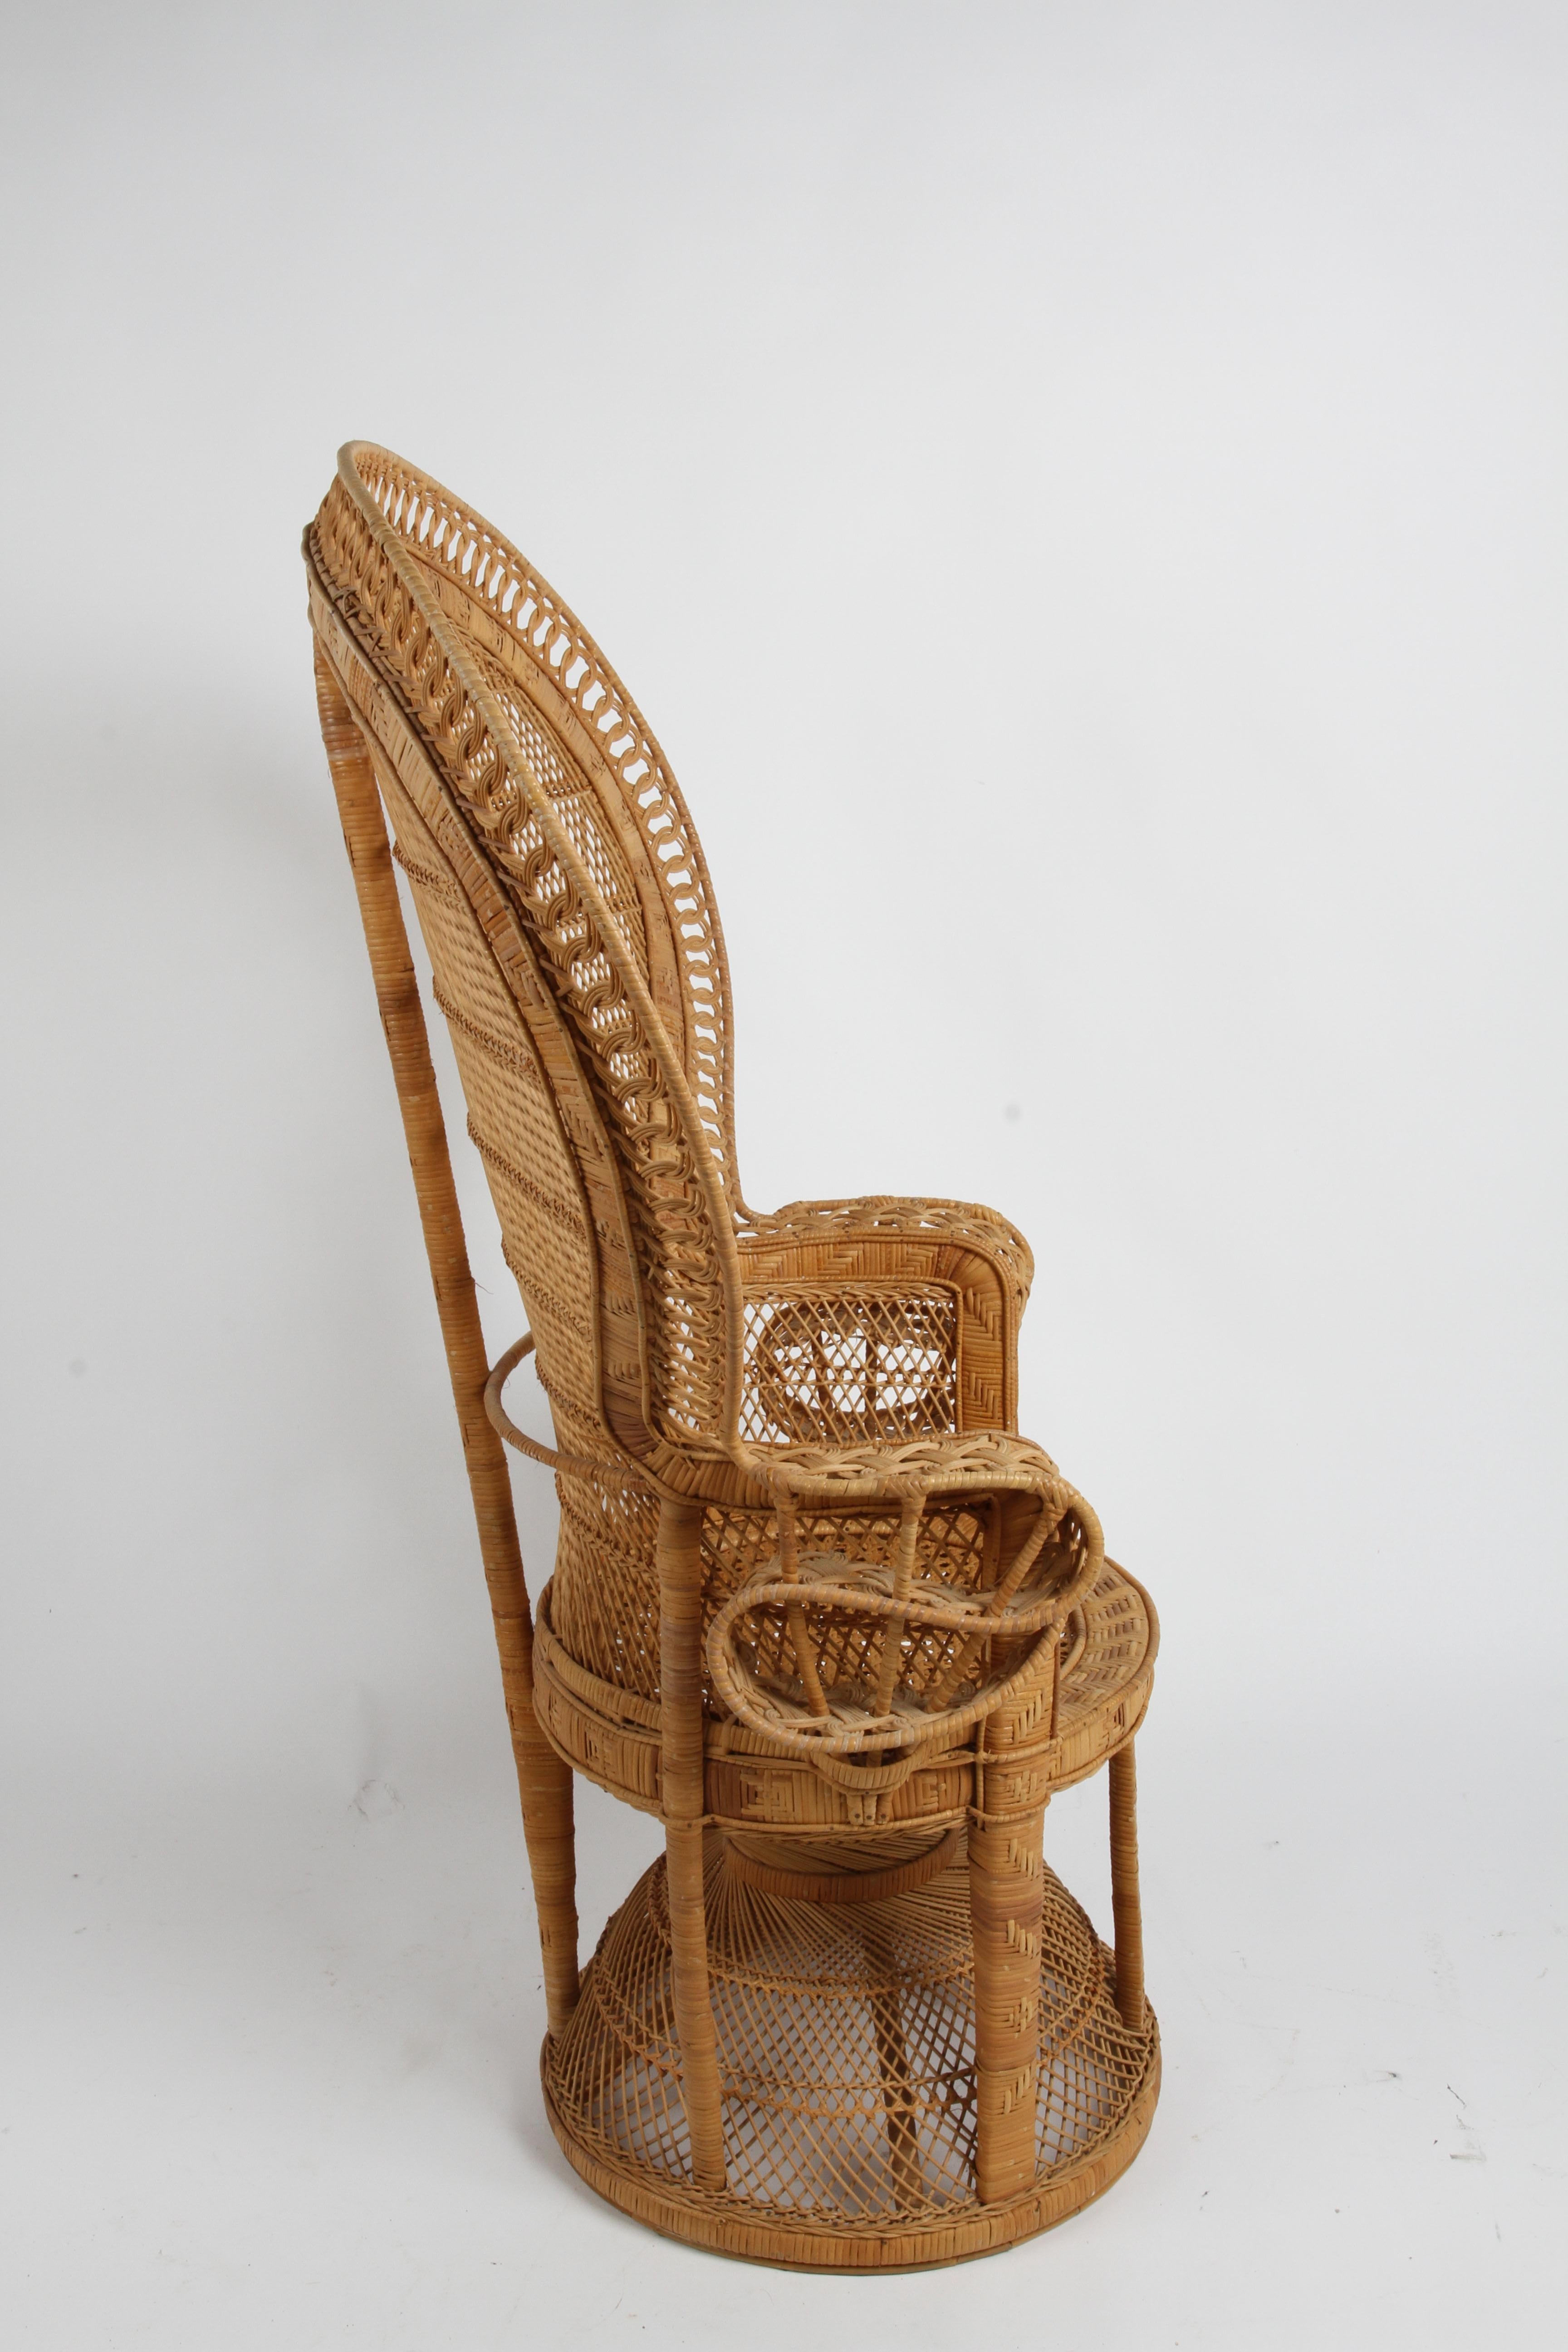 Vintage 1970s Rattan & Wicker Handcrafted Boho Chic Emmanuelle Peacock Chair For Sale 3